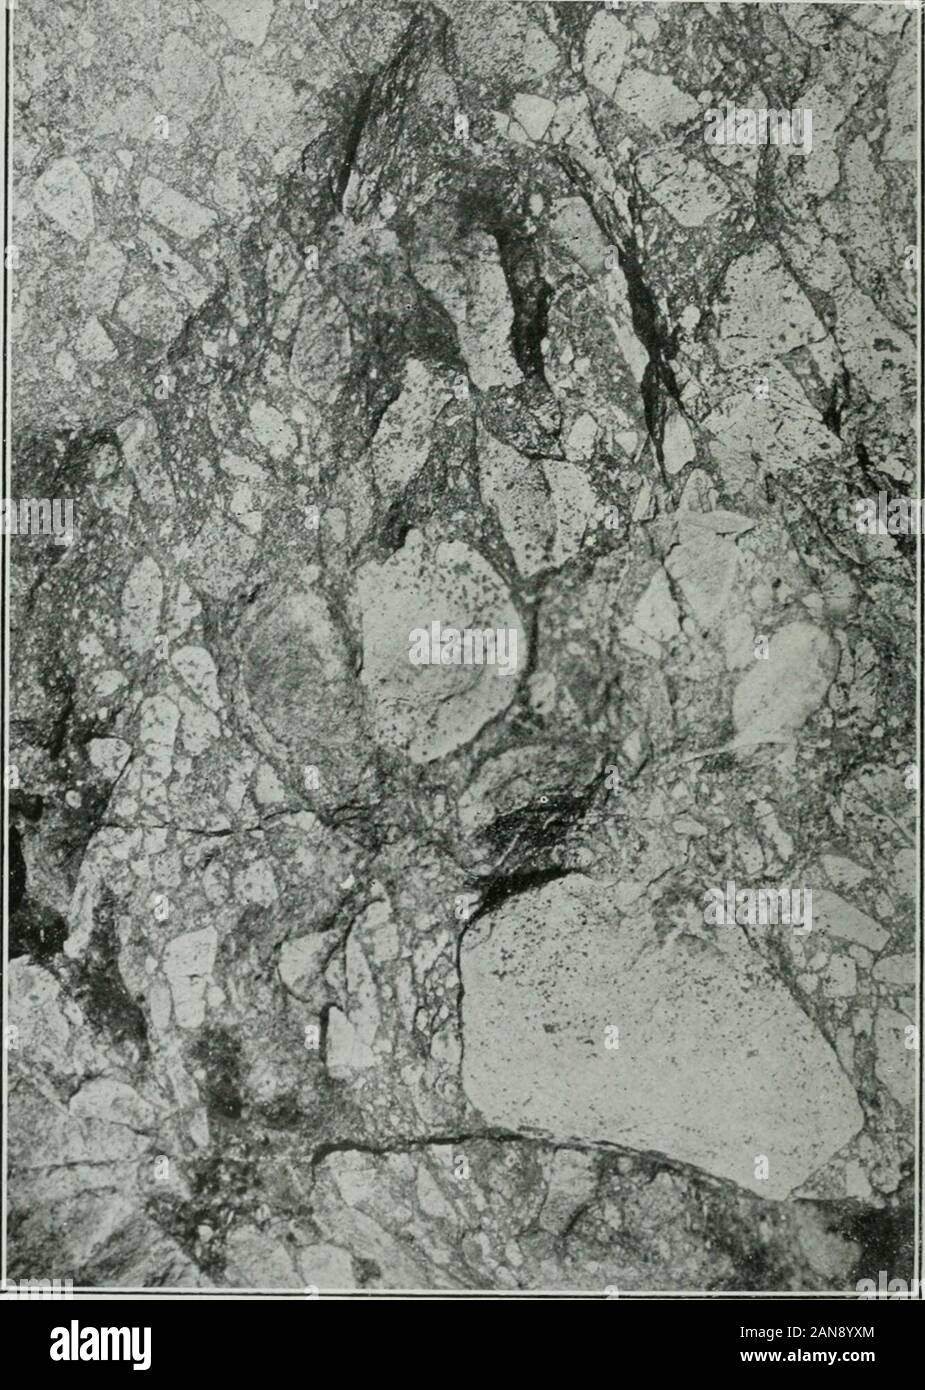 Annual report . garnets have been developed. The fragments vary from microscopic in size tothose which are eighteen inches or more in diameter. The outlines are angular, sub-angular or round, Fig. 30. They consist of felsite or rhyolite, devitrified glass showingflow textures, amygdaloid, fine-grained acid porphyries, quartz, feldspar, crystallinelimestone, slate, fine-grained greywacke or quartzite, and chert; sericite, calcite, garnetand biotite have been developed as secondary minerals. While some of the fragmental material is agglomeratic in character, other partsare more like normal congl Stock Photo